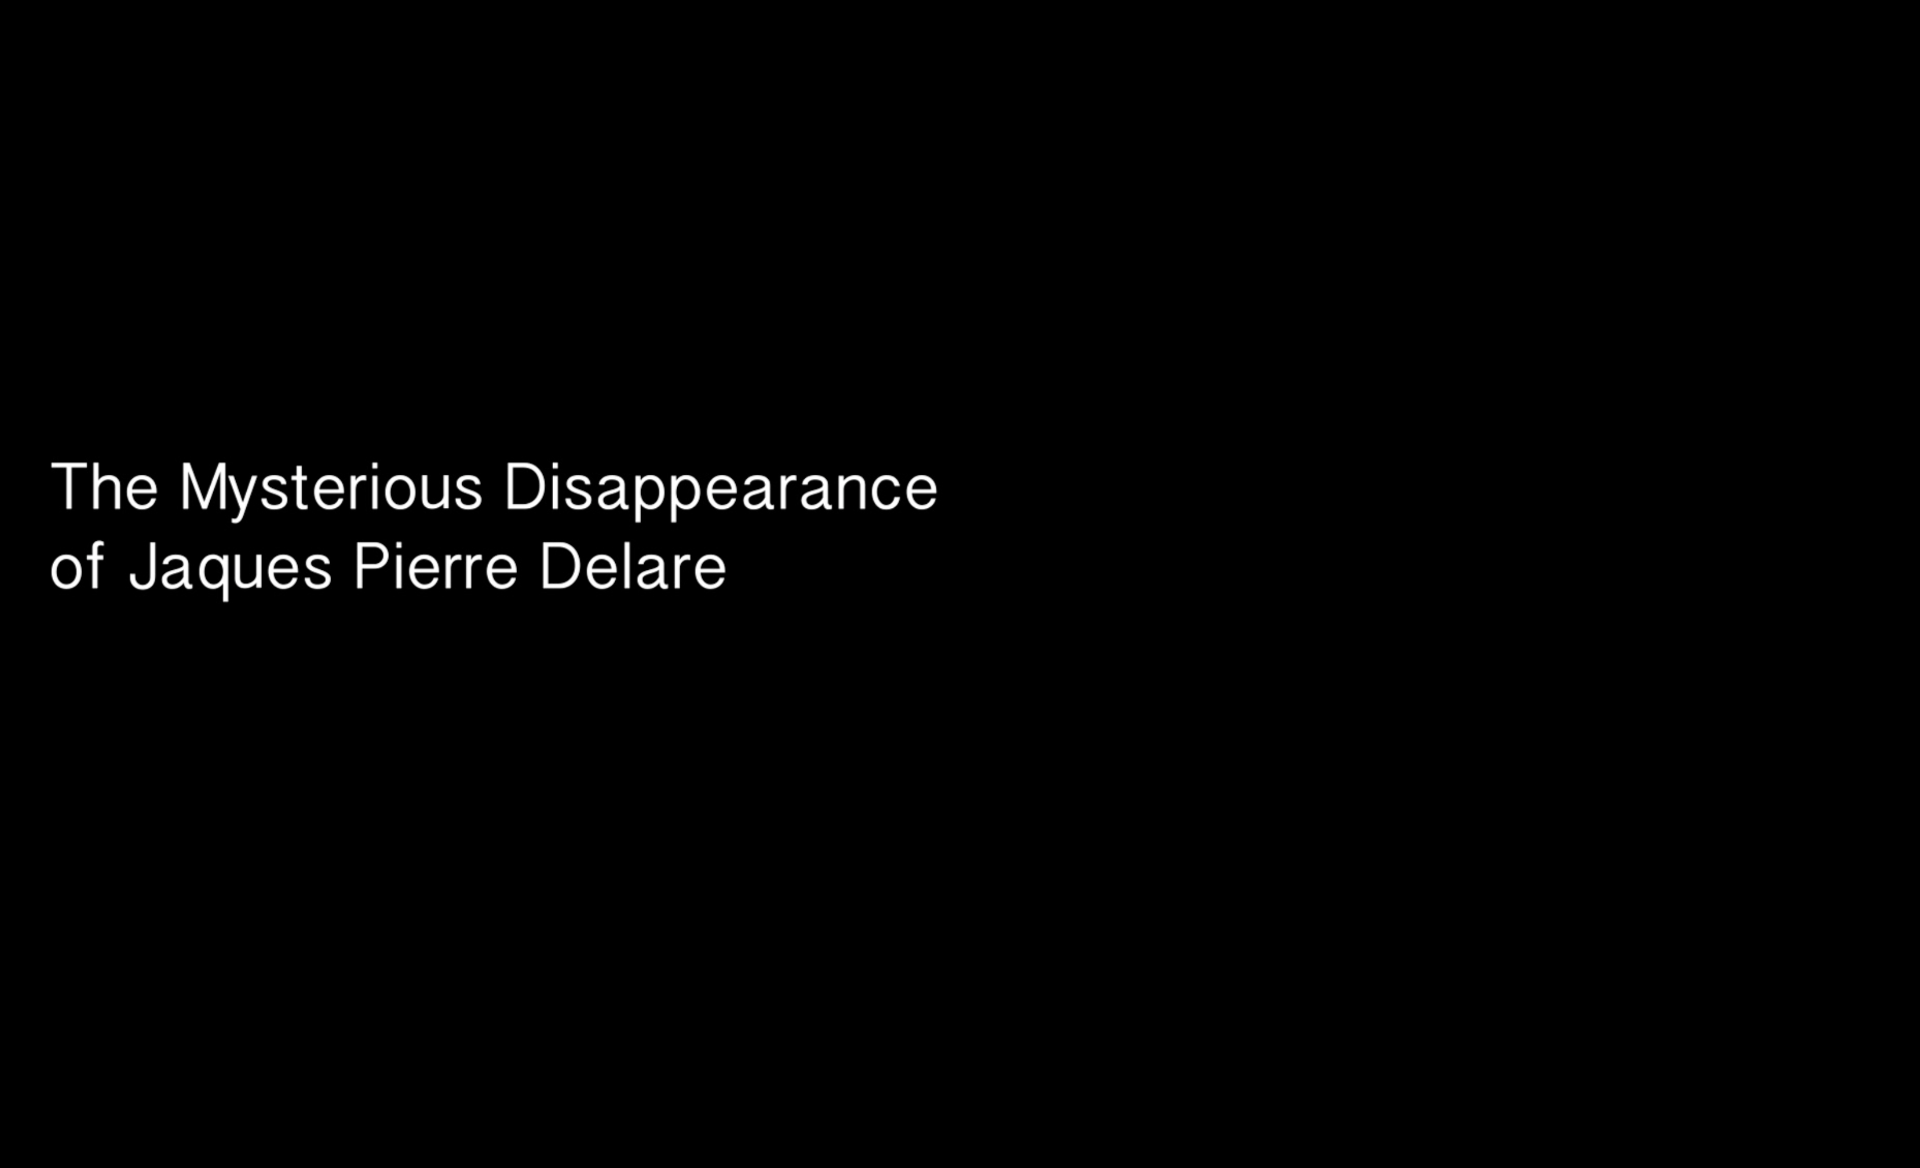 The Mysterious Disappearance of Jaques Pierre Delare Final Cut